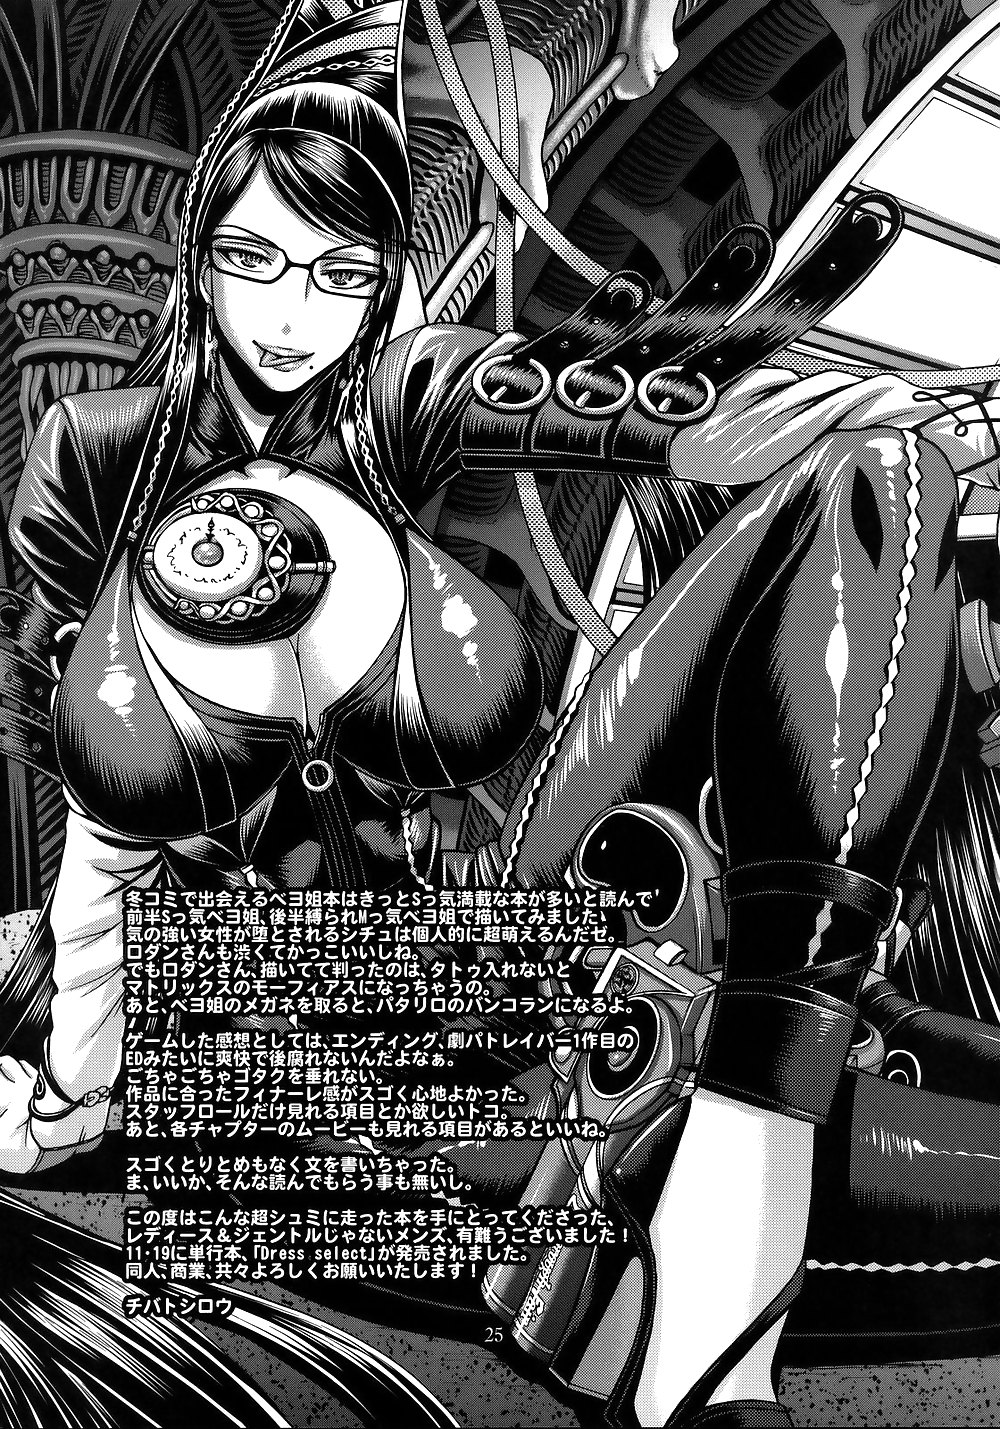 Bayonetta - a certain witchs sex life #17354059